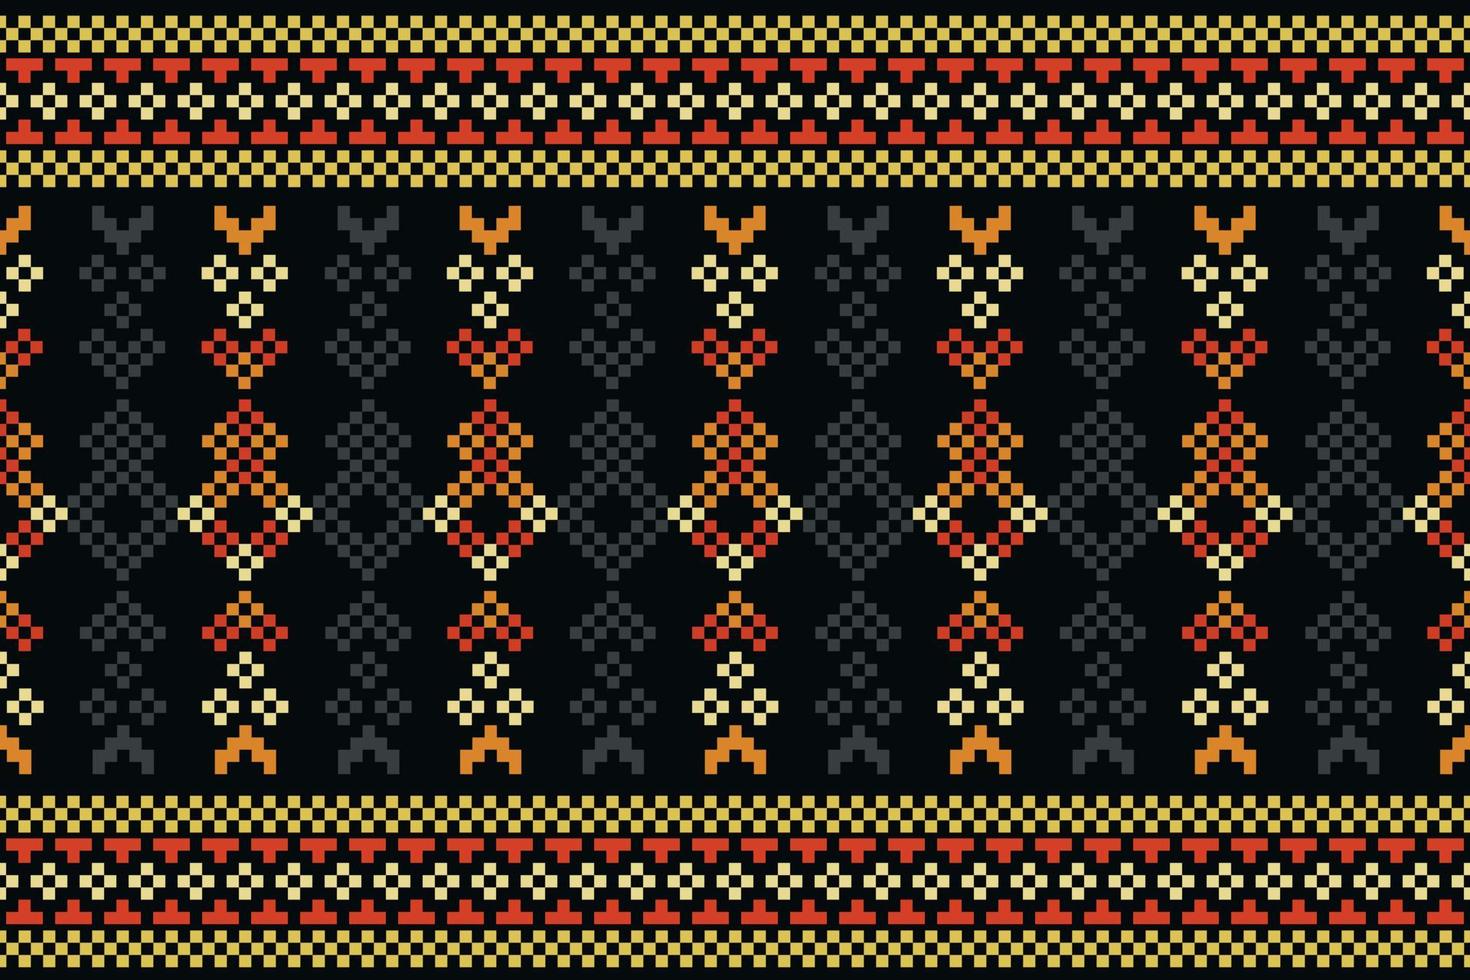 Ethnic geometric fabric pattern Cross Stitch.Ikat embroidery Ethnic oriental Pixel pattern dark black background. Abstract,vector,illustration.For texture,clothing,wrapping,decoration,carpet. vector